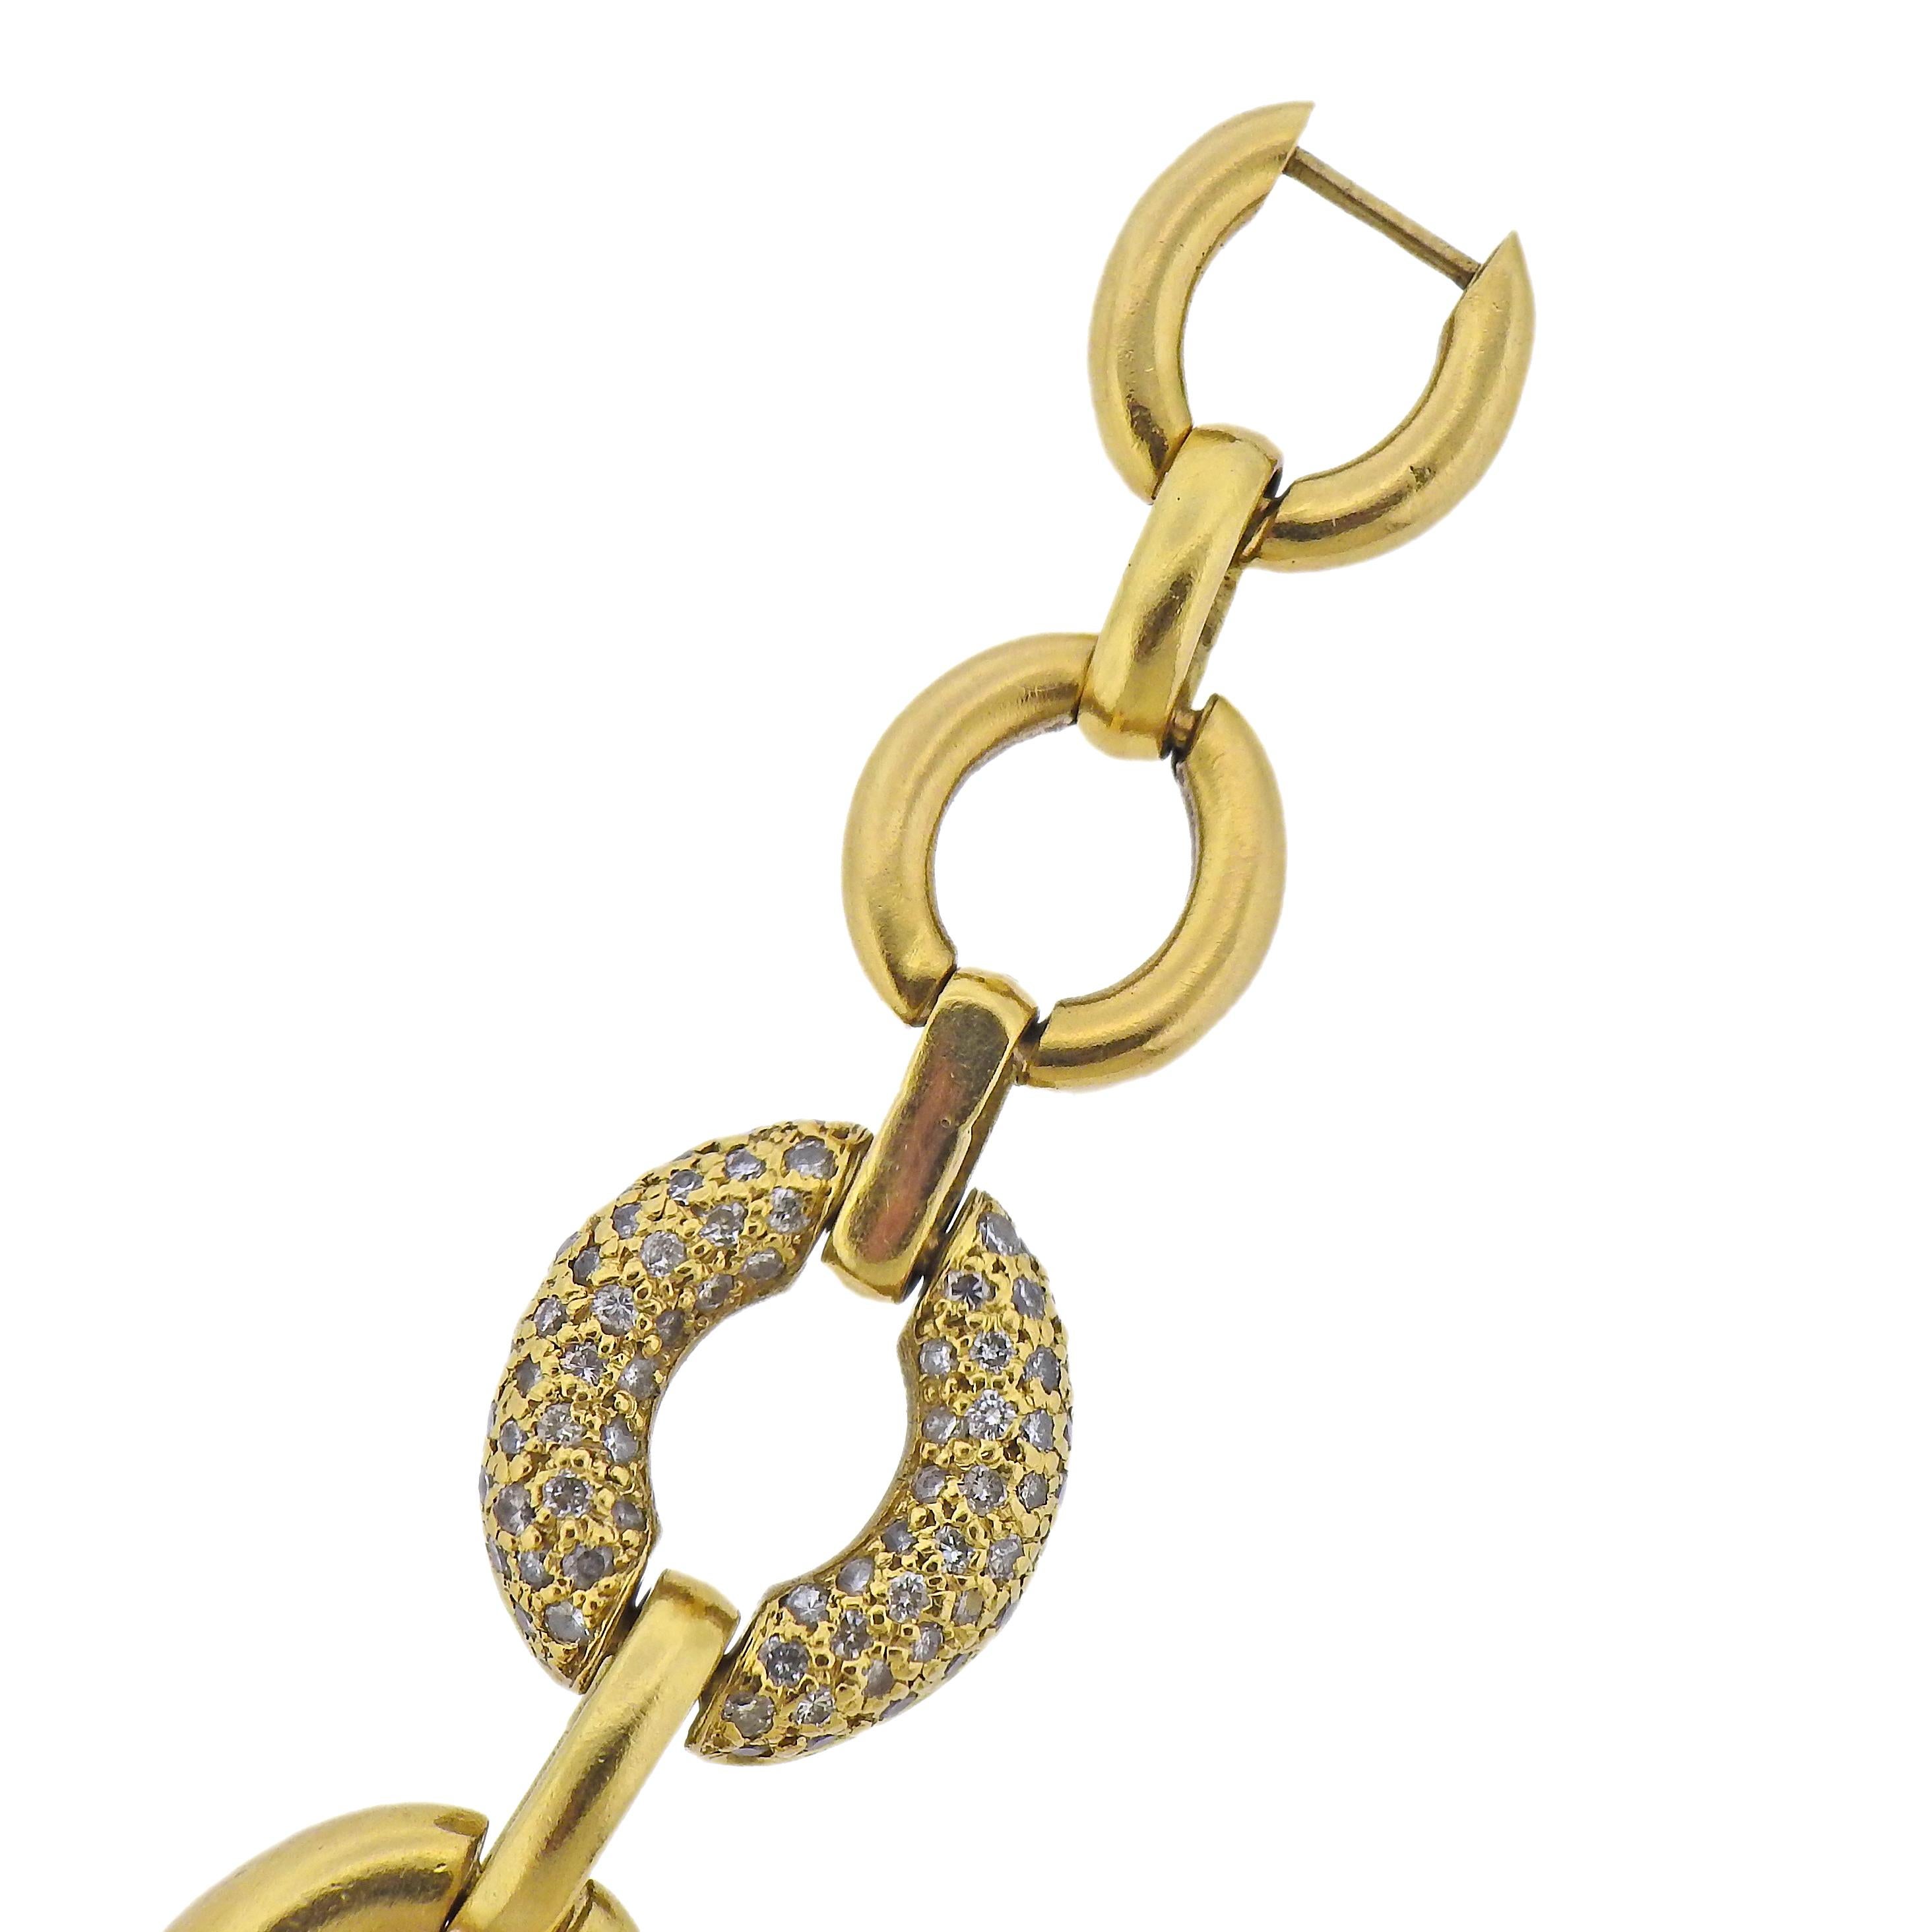 Shawn signed 18k gold oval link bracelet with approx. 1.40ctw in diamonds. Bracelet is 7.25